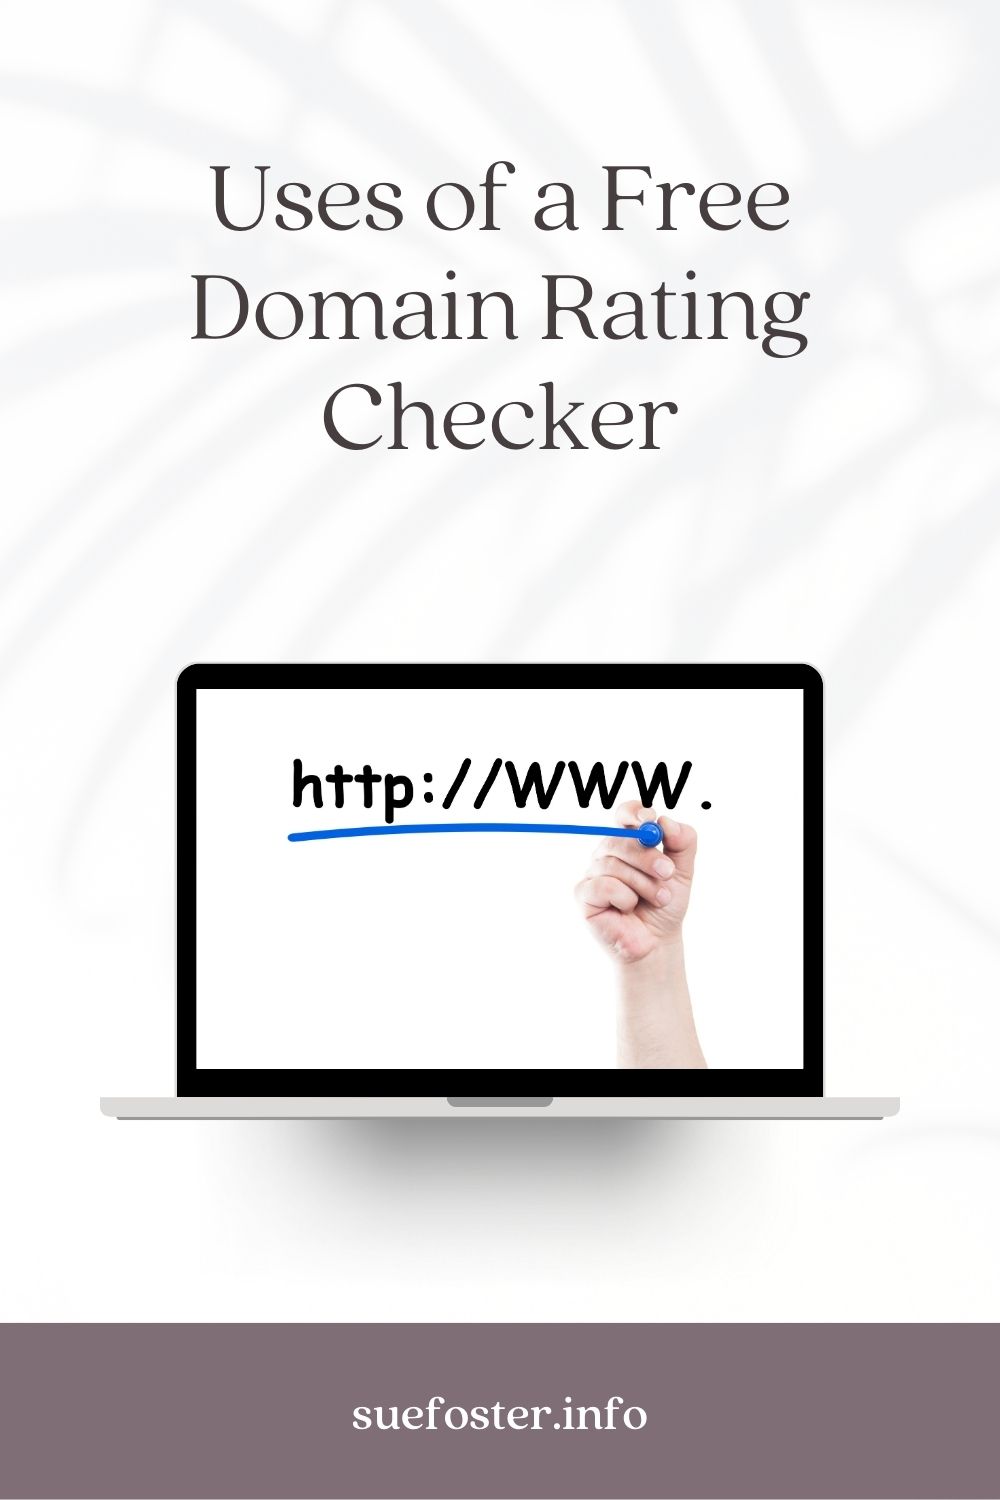 Explore how a free domain rating checker helps optimize your SEO strategy by assessing DA score, backlinks, domain age, keywords, and competitive analysis.